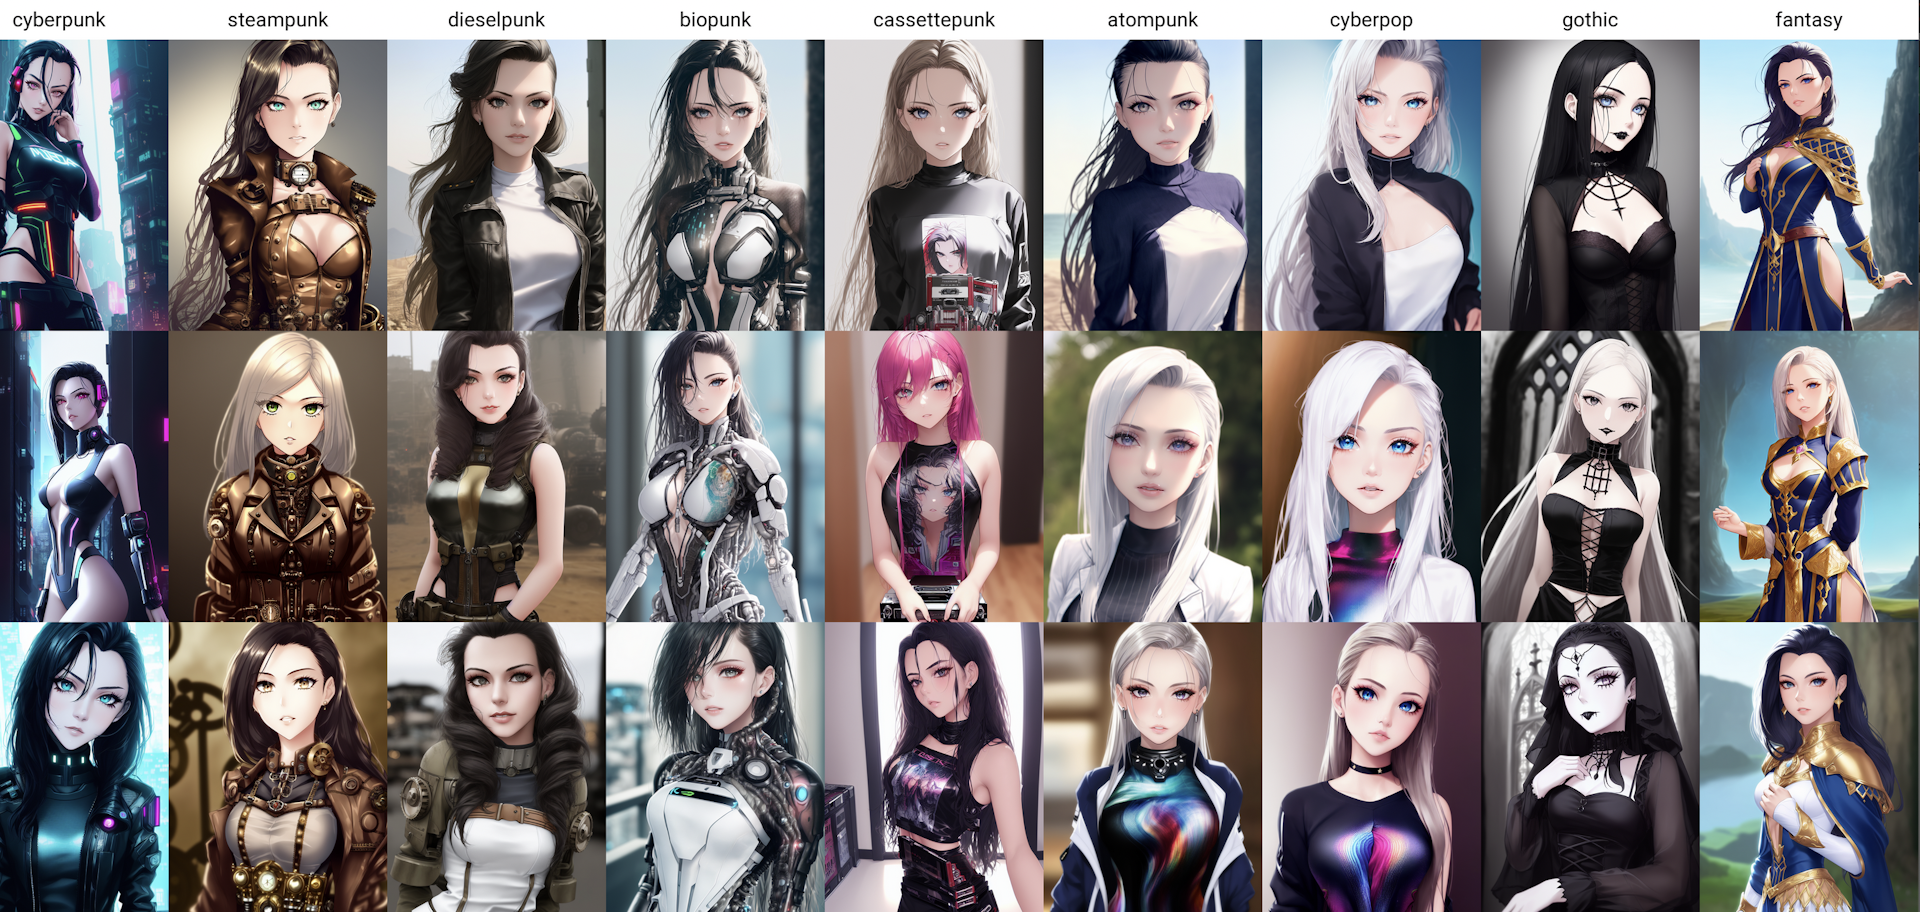 Grid of many images of cartoon women in various costumes created by generative AI.